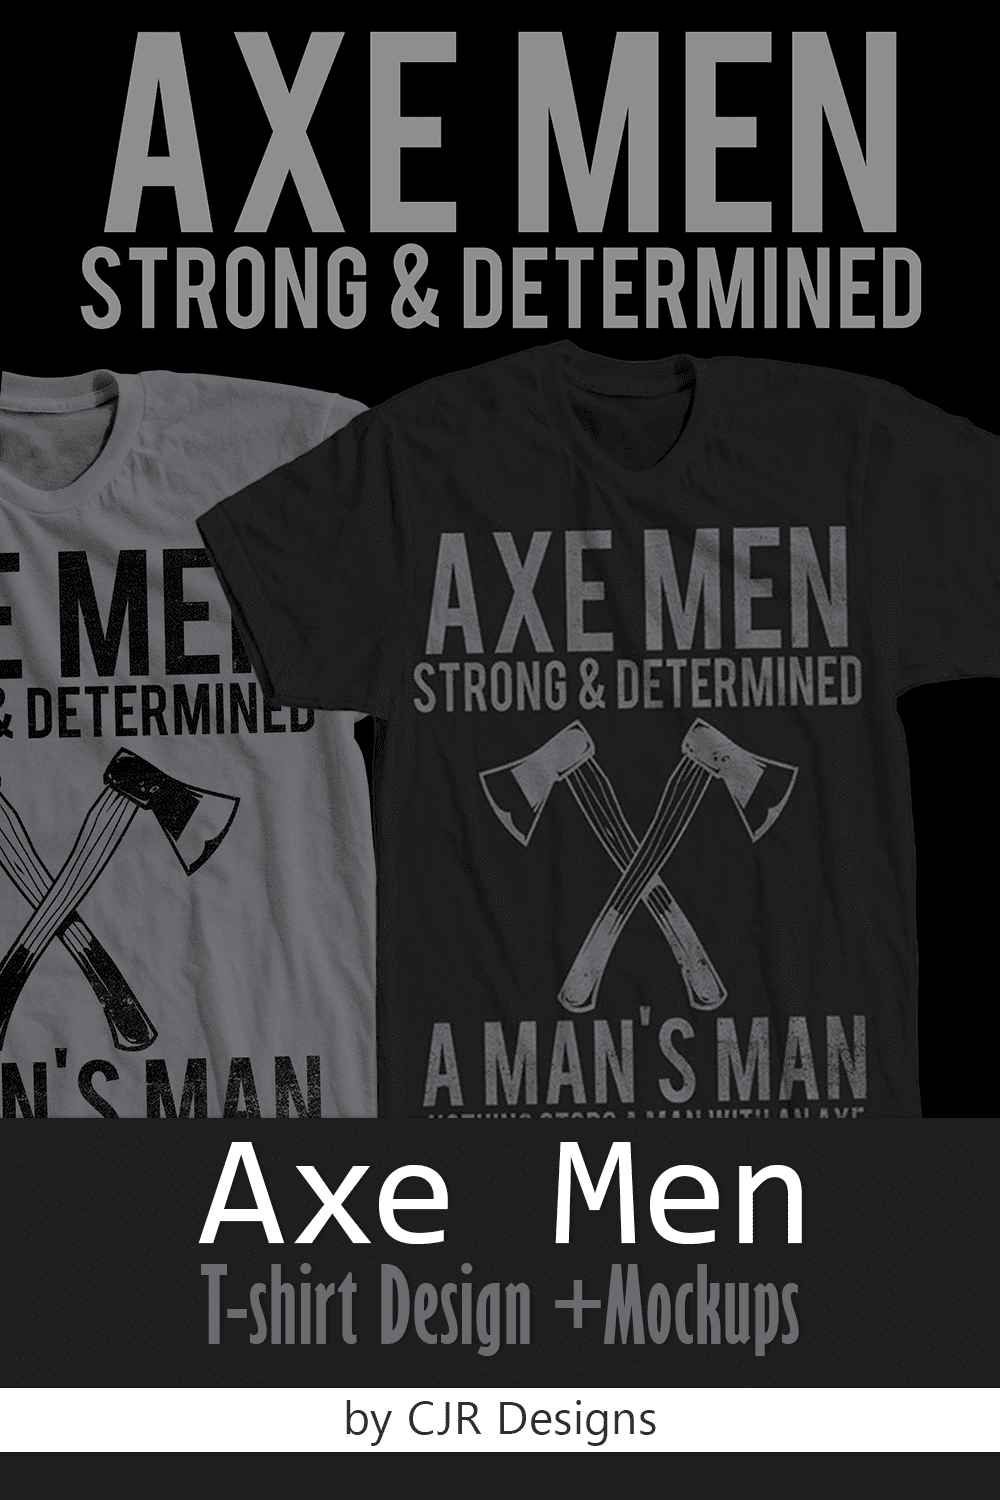 Black and white t-shirt with adorable ax graphics and slogans.